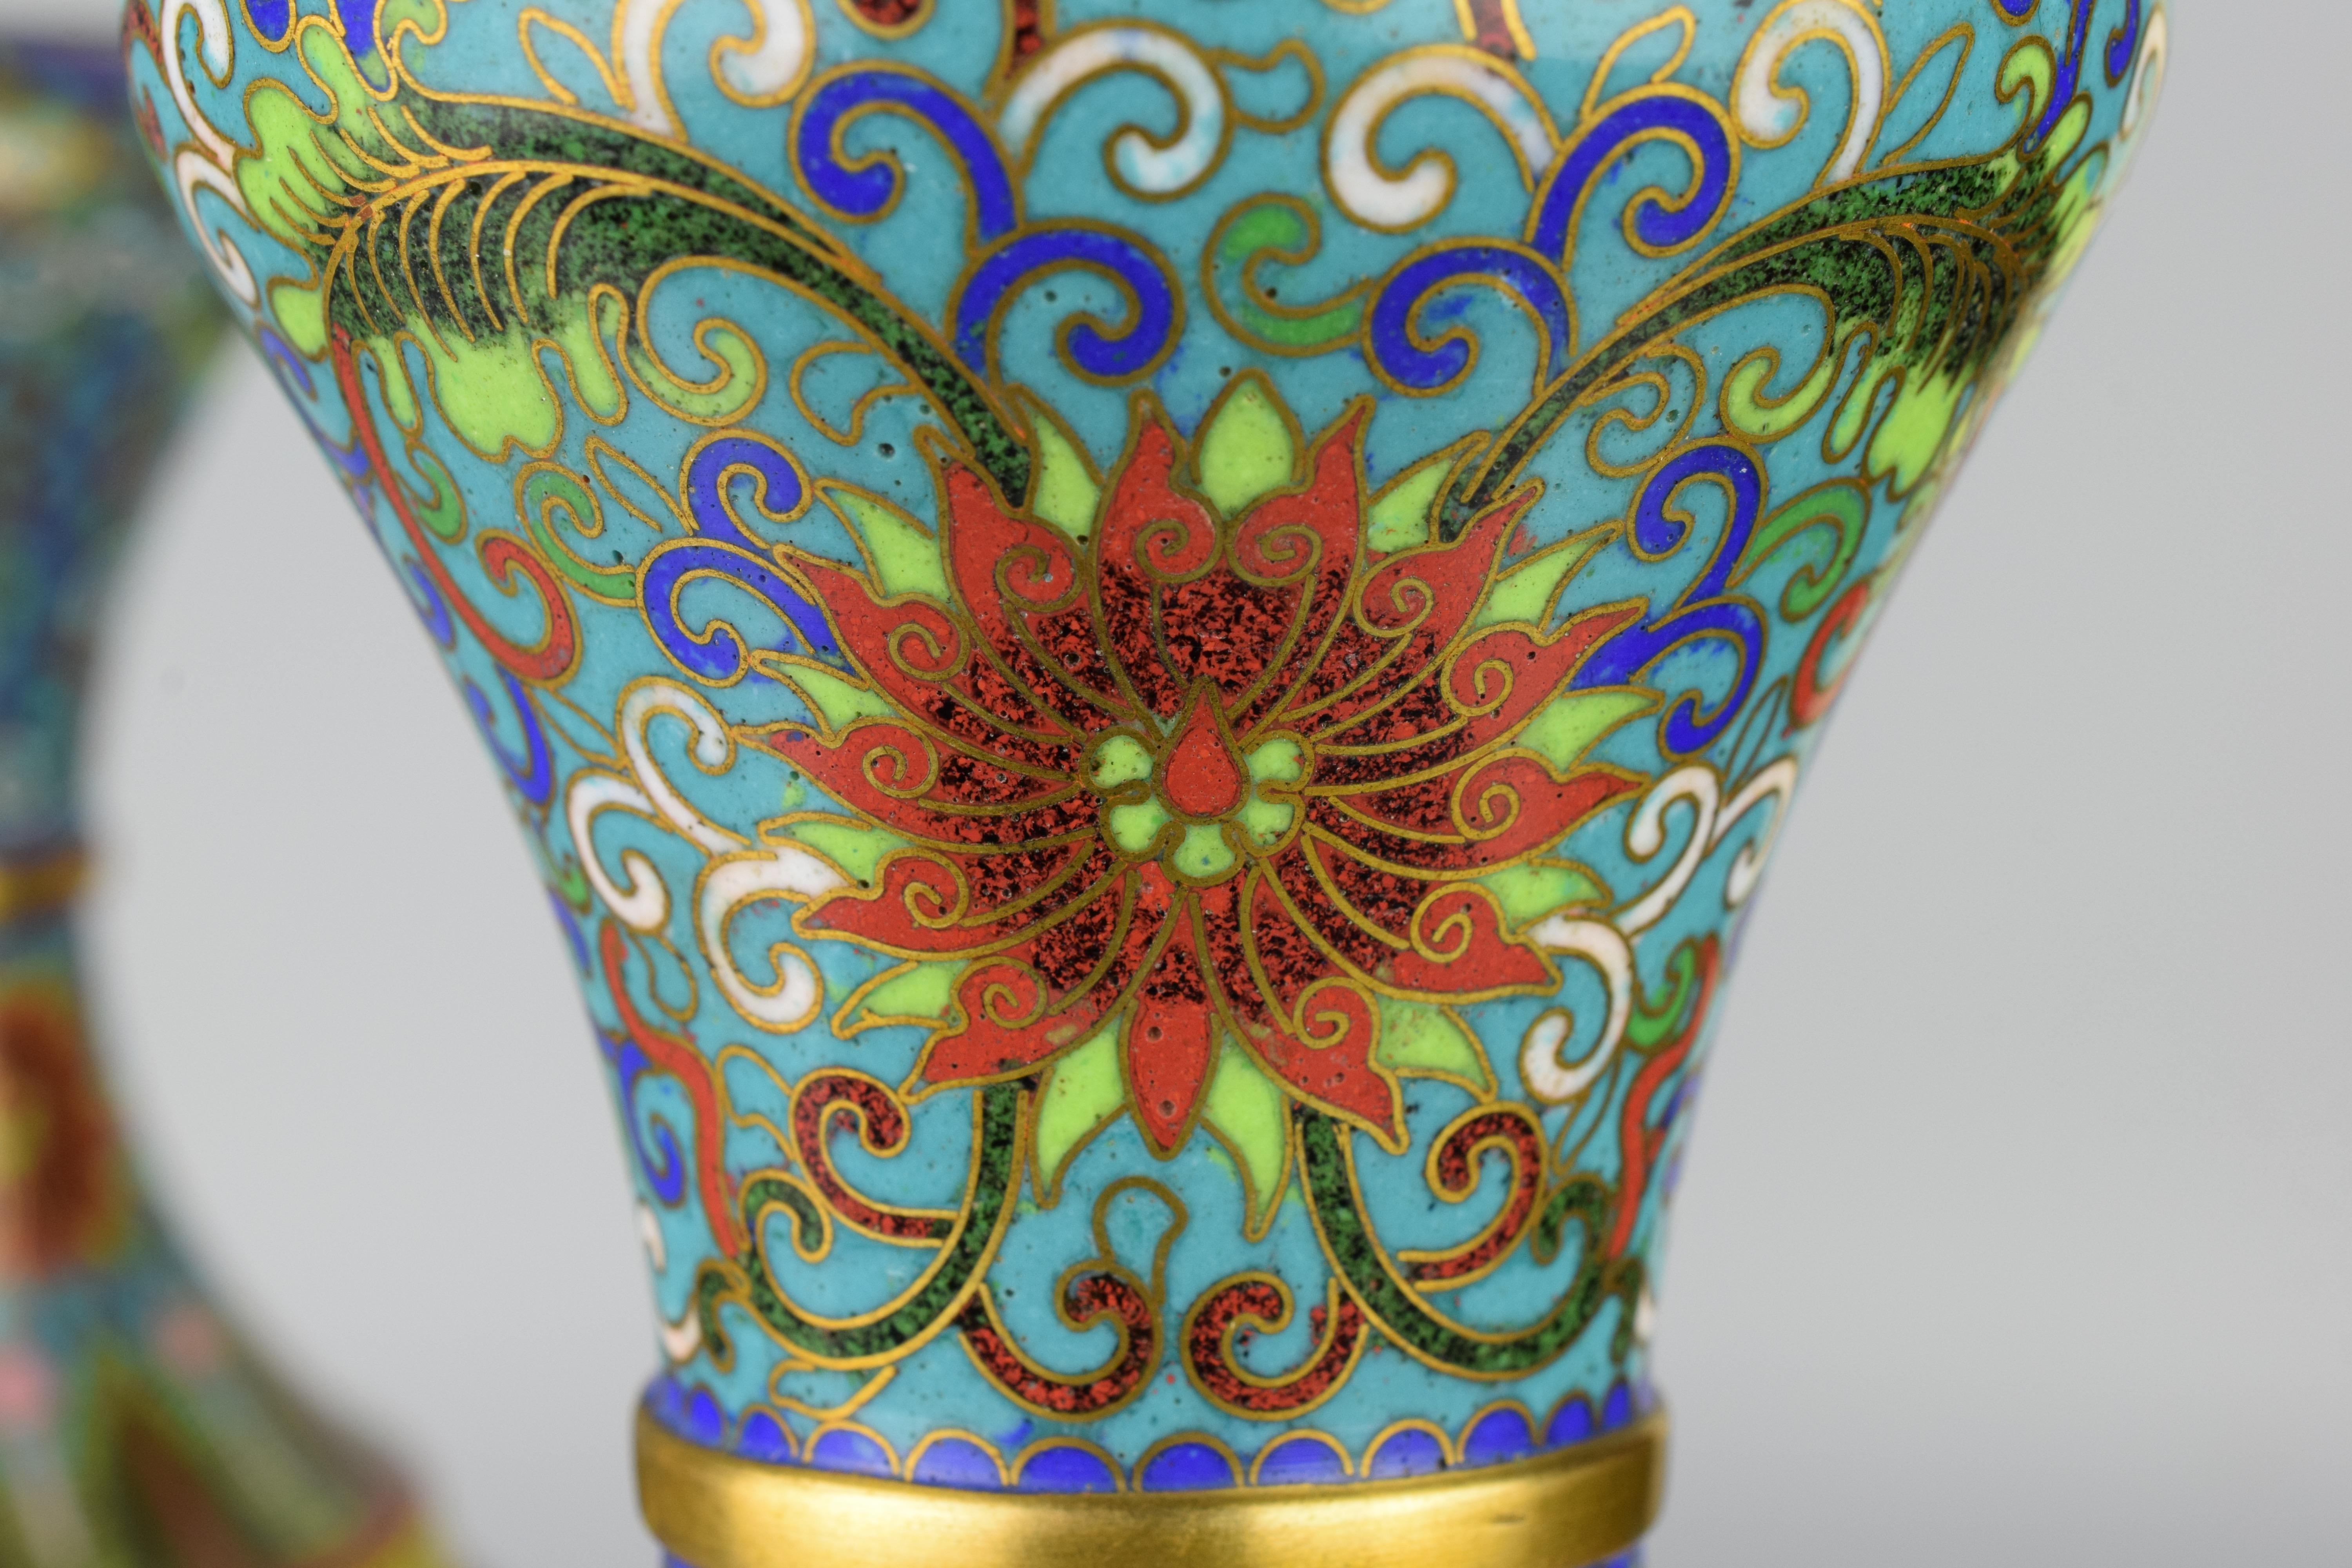 Cloissoné Pair of Chinese Blue Cloisonné Vases, Enamelled and Gilded, Early 20th Century For Sale